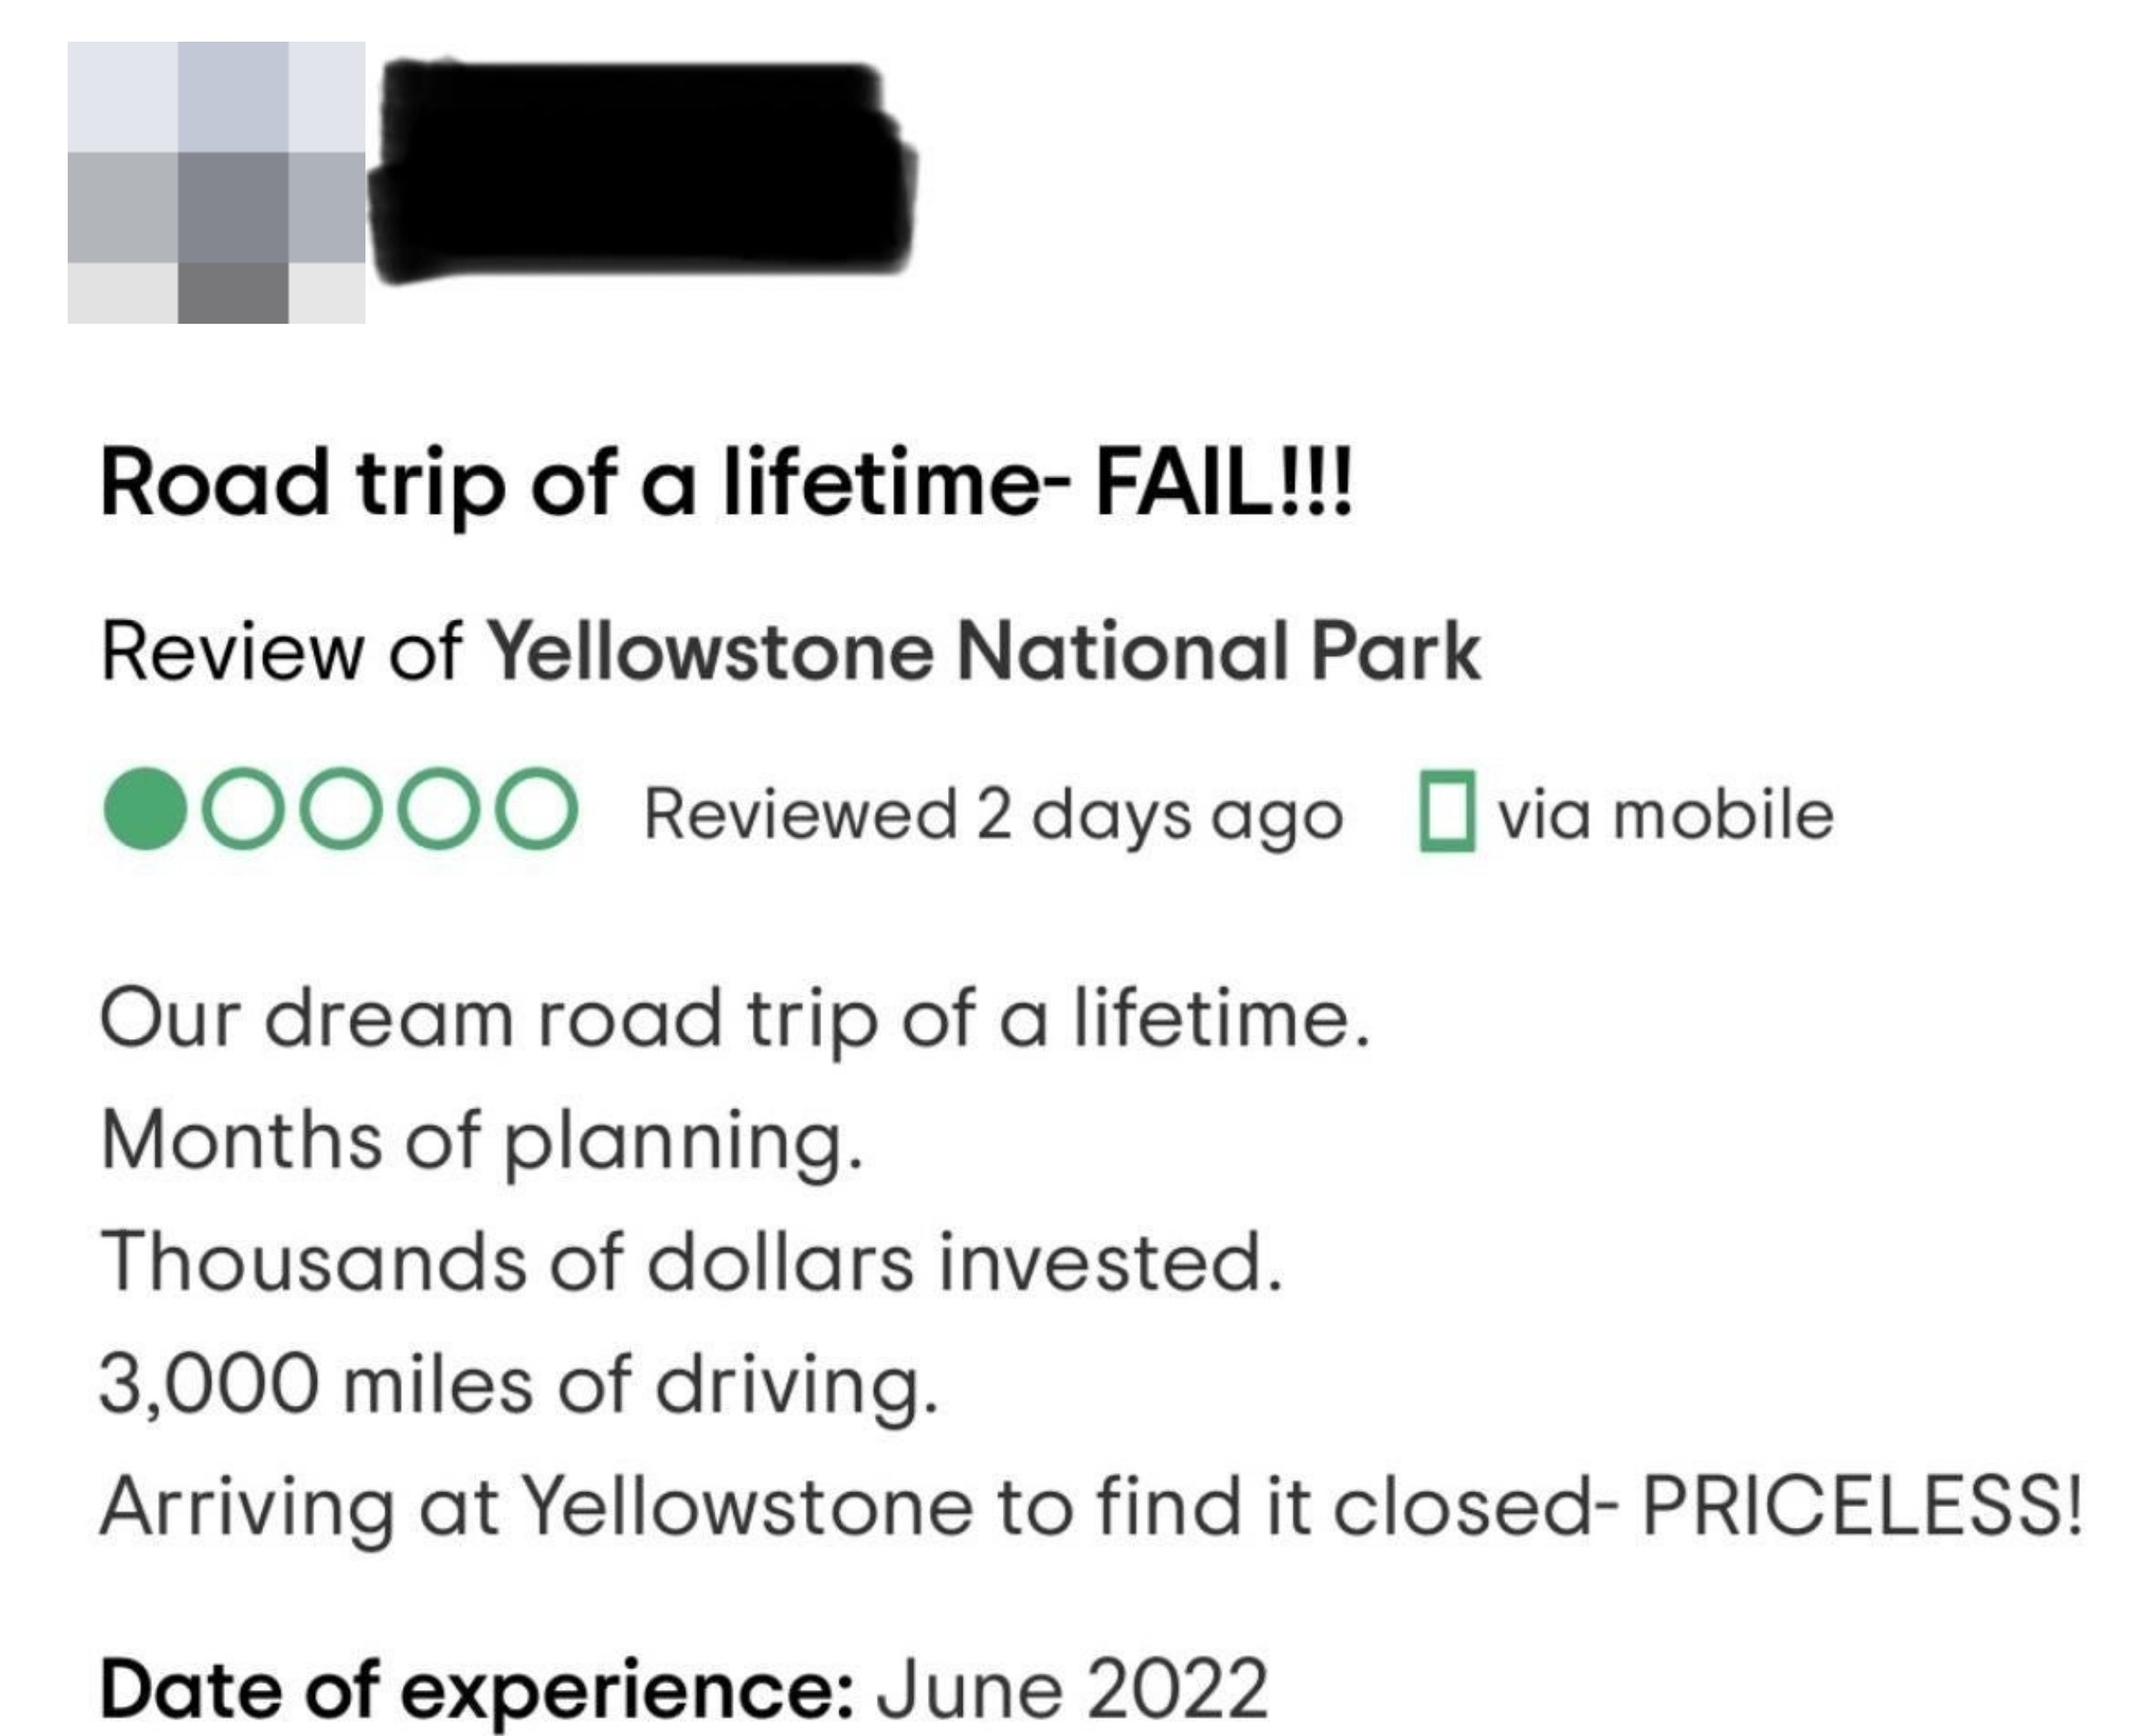 The review says &quot;our dream road trip of a lifetime, months of planning, thousands of dollars invested, 3,000 miles of driving, arriving at Yellowstone to find it closed — priceless!&quot;